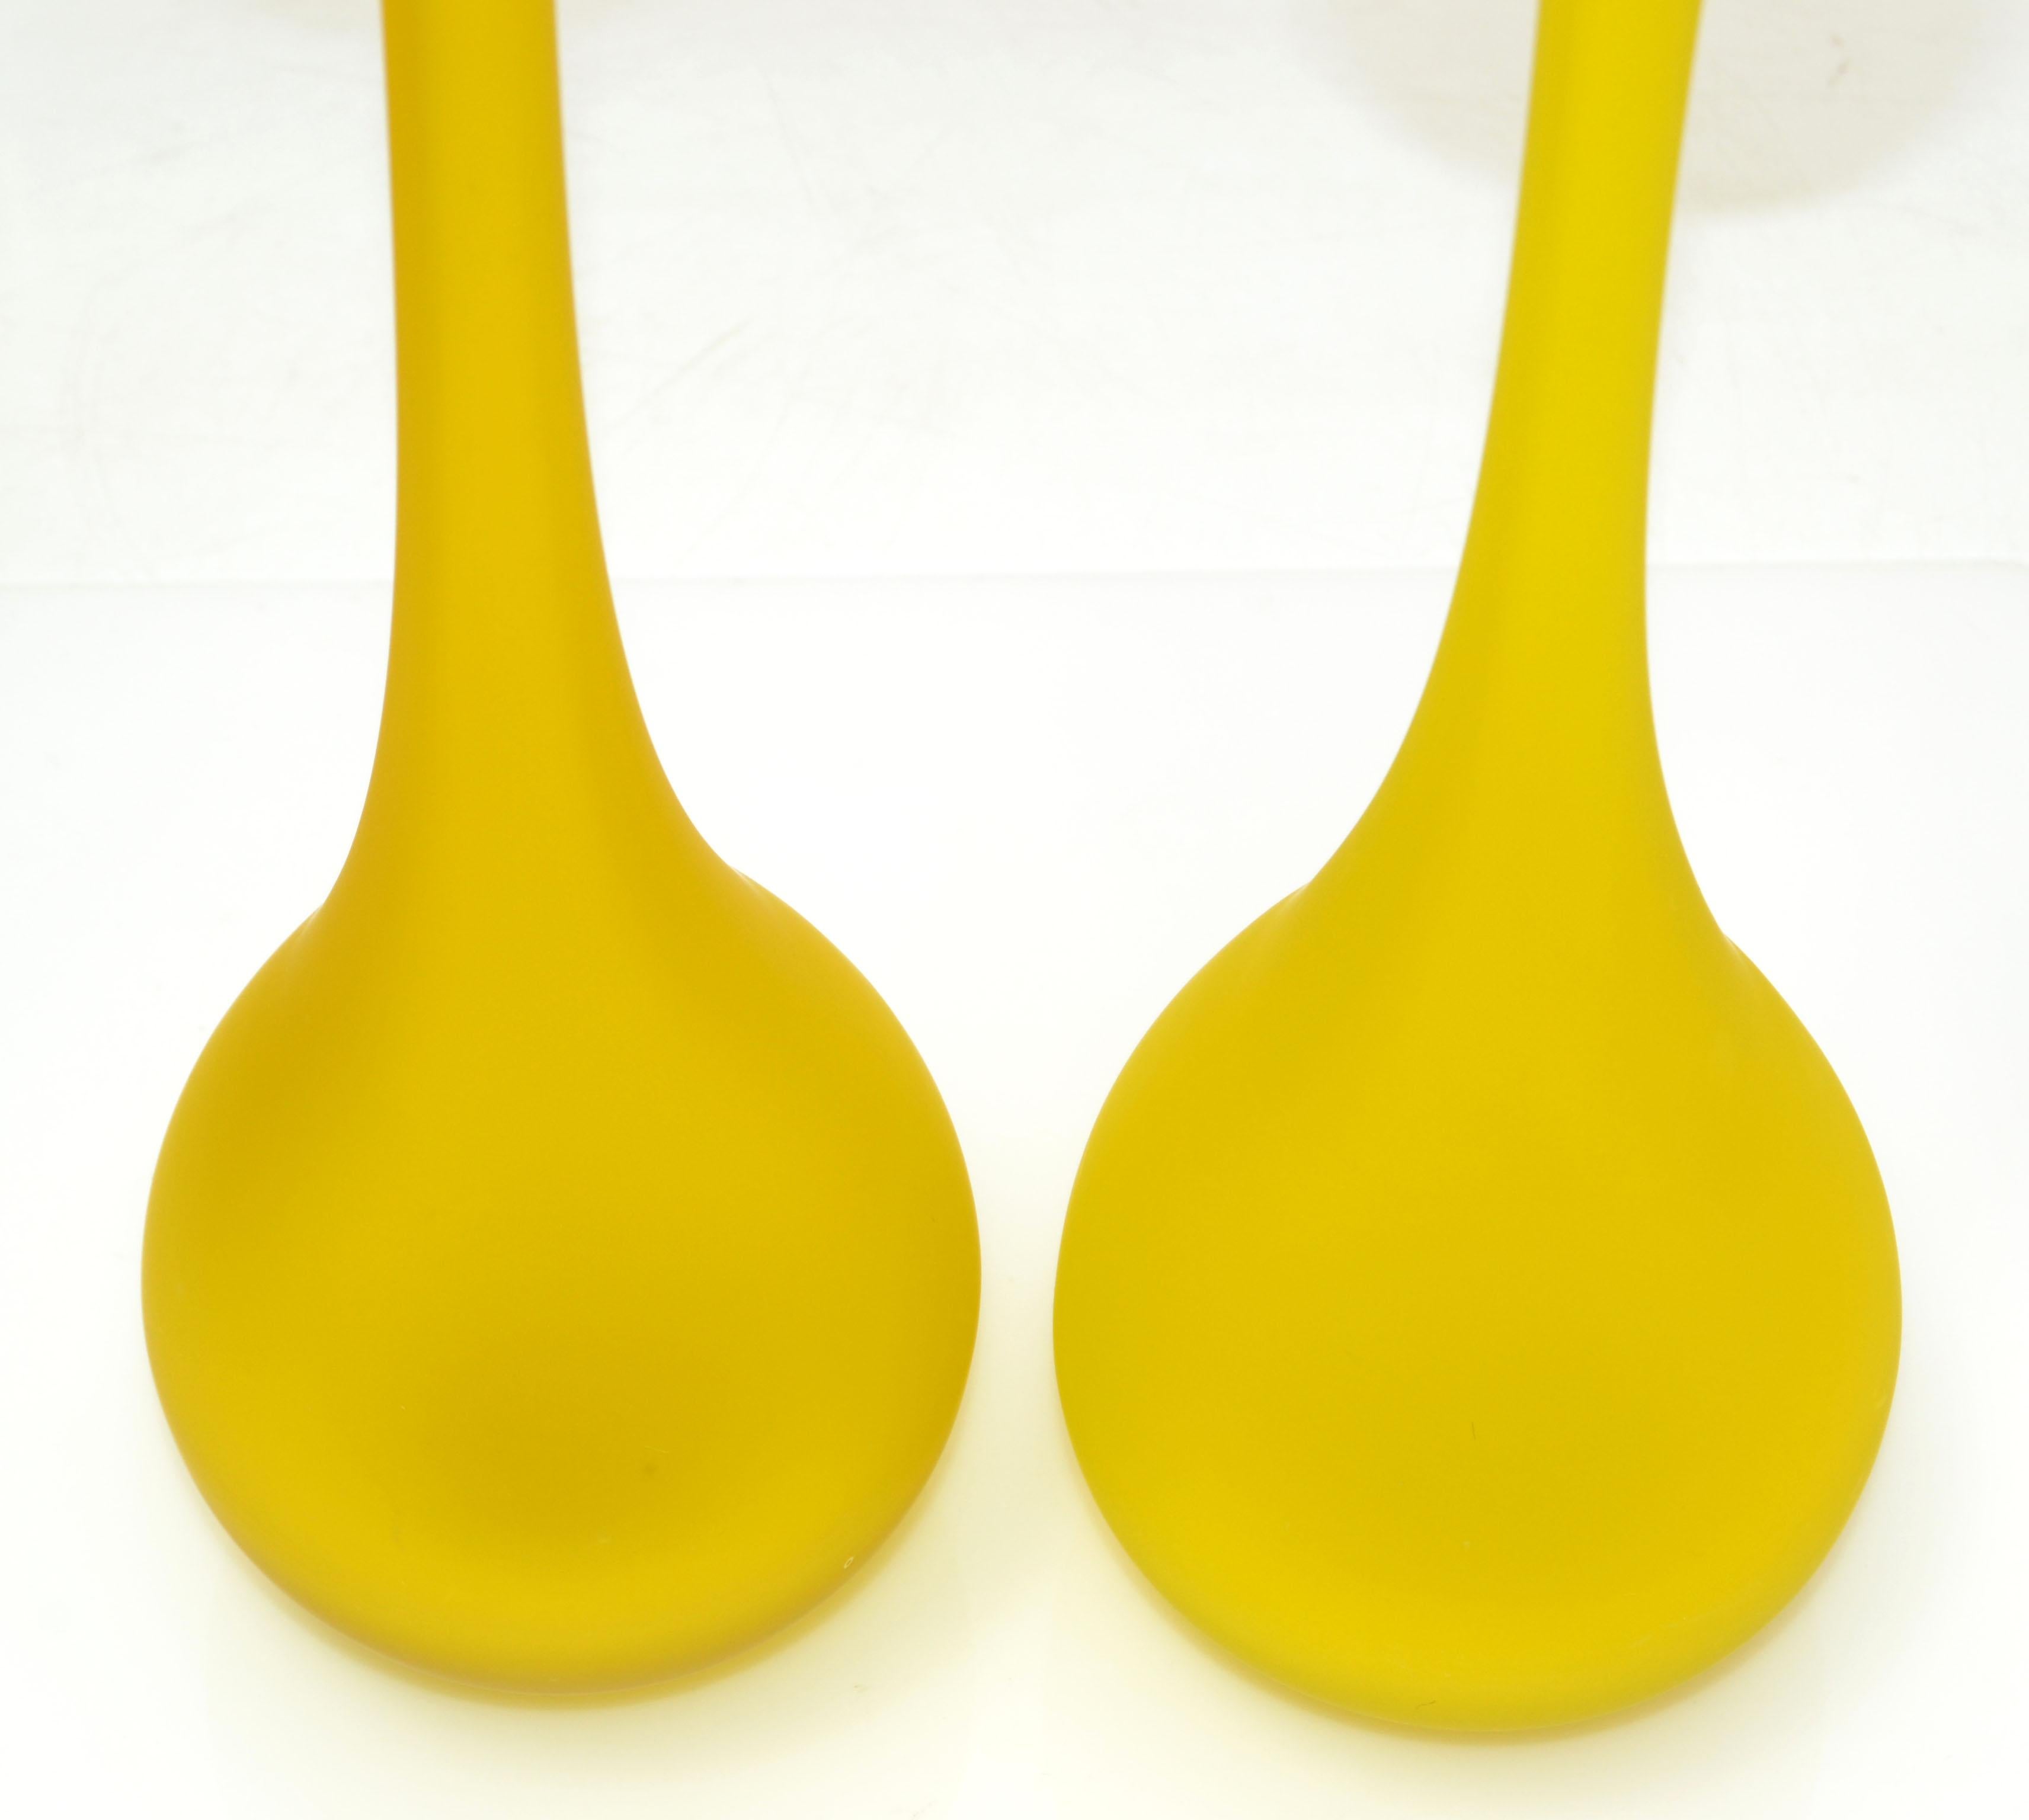 Mid-20th Century Pair, Mid-Century Modern Translucent Blue and Yellow Satin Glass Bud Vase, Italy For Sale